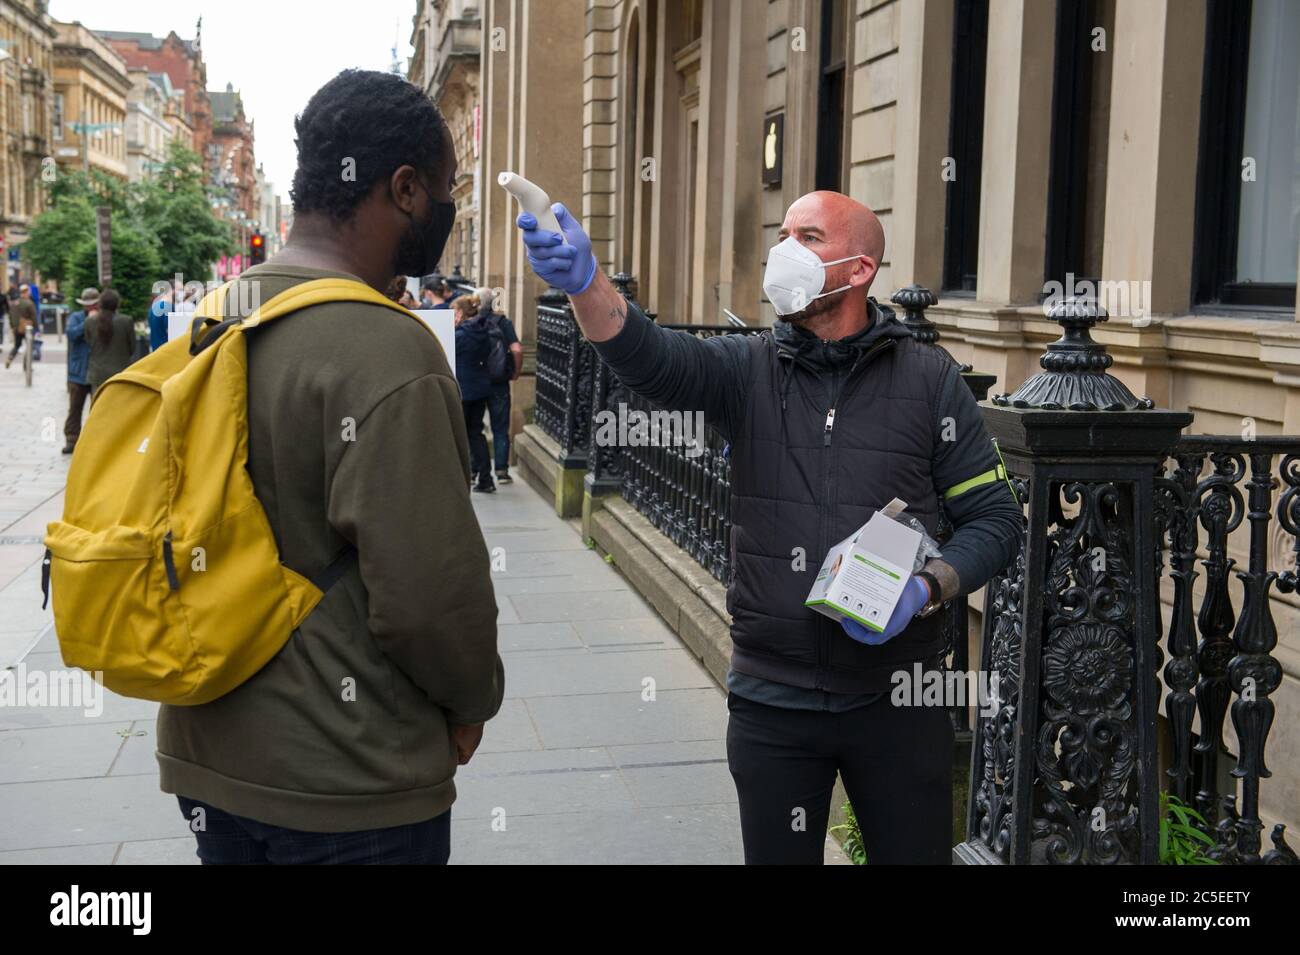 Glasgow, Scotland, UK. 2nd July, 2020. Pictured: An employee takes customers temperature before being allowed into the Apple Shop. Scenes from Glasgows style mile, Buchanan Street shopping area, where more people are seen wearing face masks or home made face coverings. Nicola Sturgeon announced earlier today that wearing a face covering is to become mandatory in shops from 10th July next week. Face coverings are already mandatory when taking public transport in a bid to slow down the spread of coronavirus. Credit: Colin Fisher/Alamy Live News Stock Photo